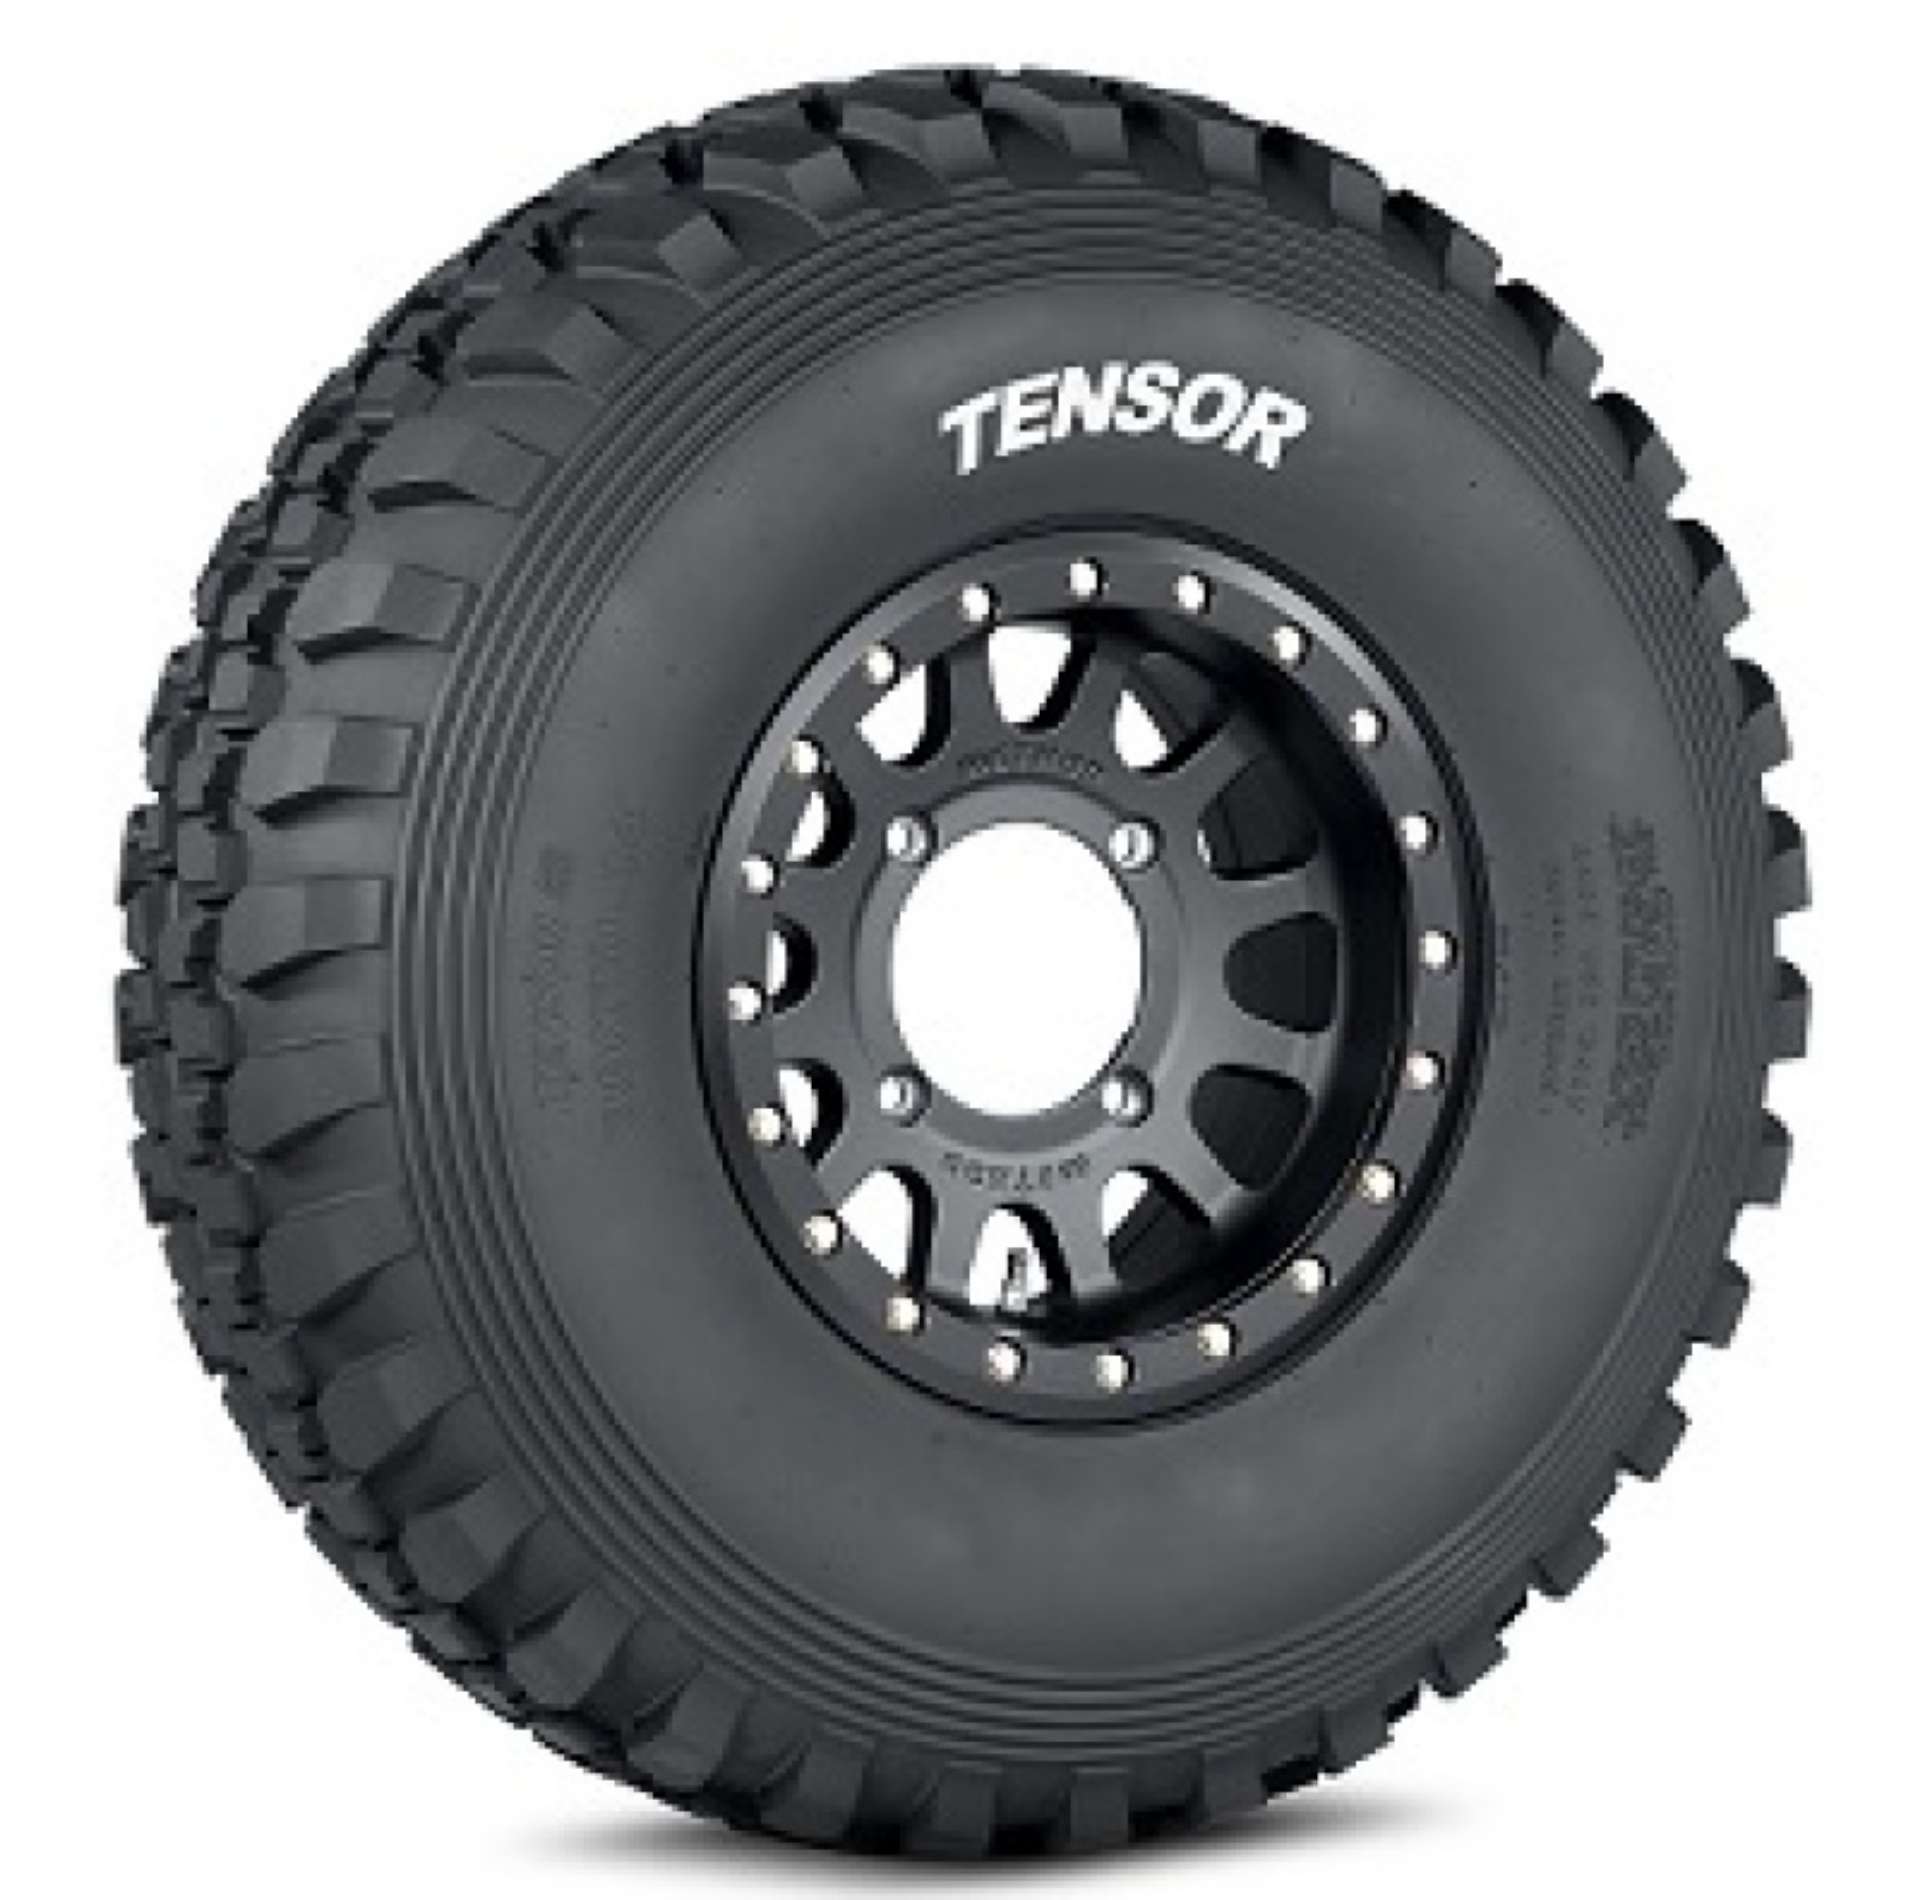 Picture of Tensor Tire Desert Series DS Tire - 60 Durometer Tread Compound - 30x10-14